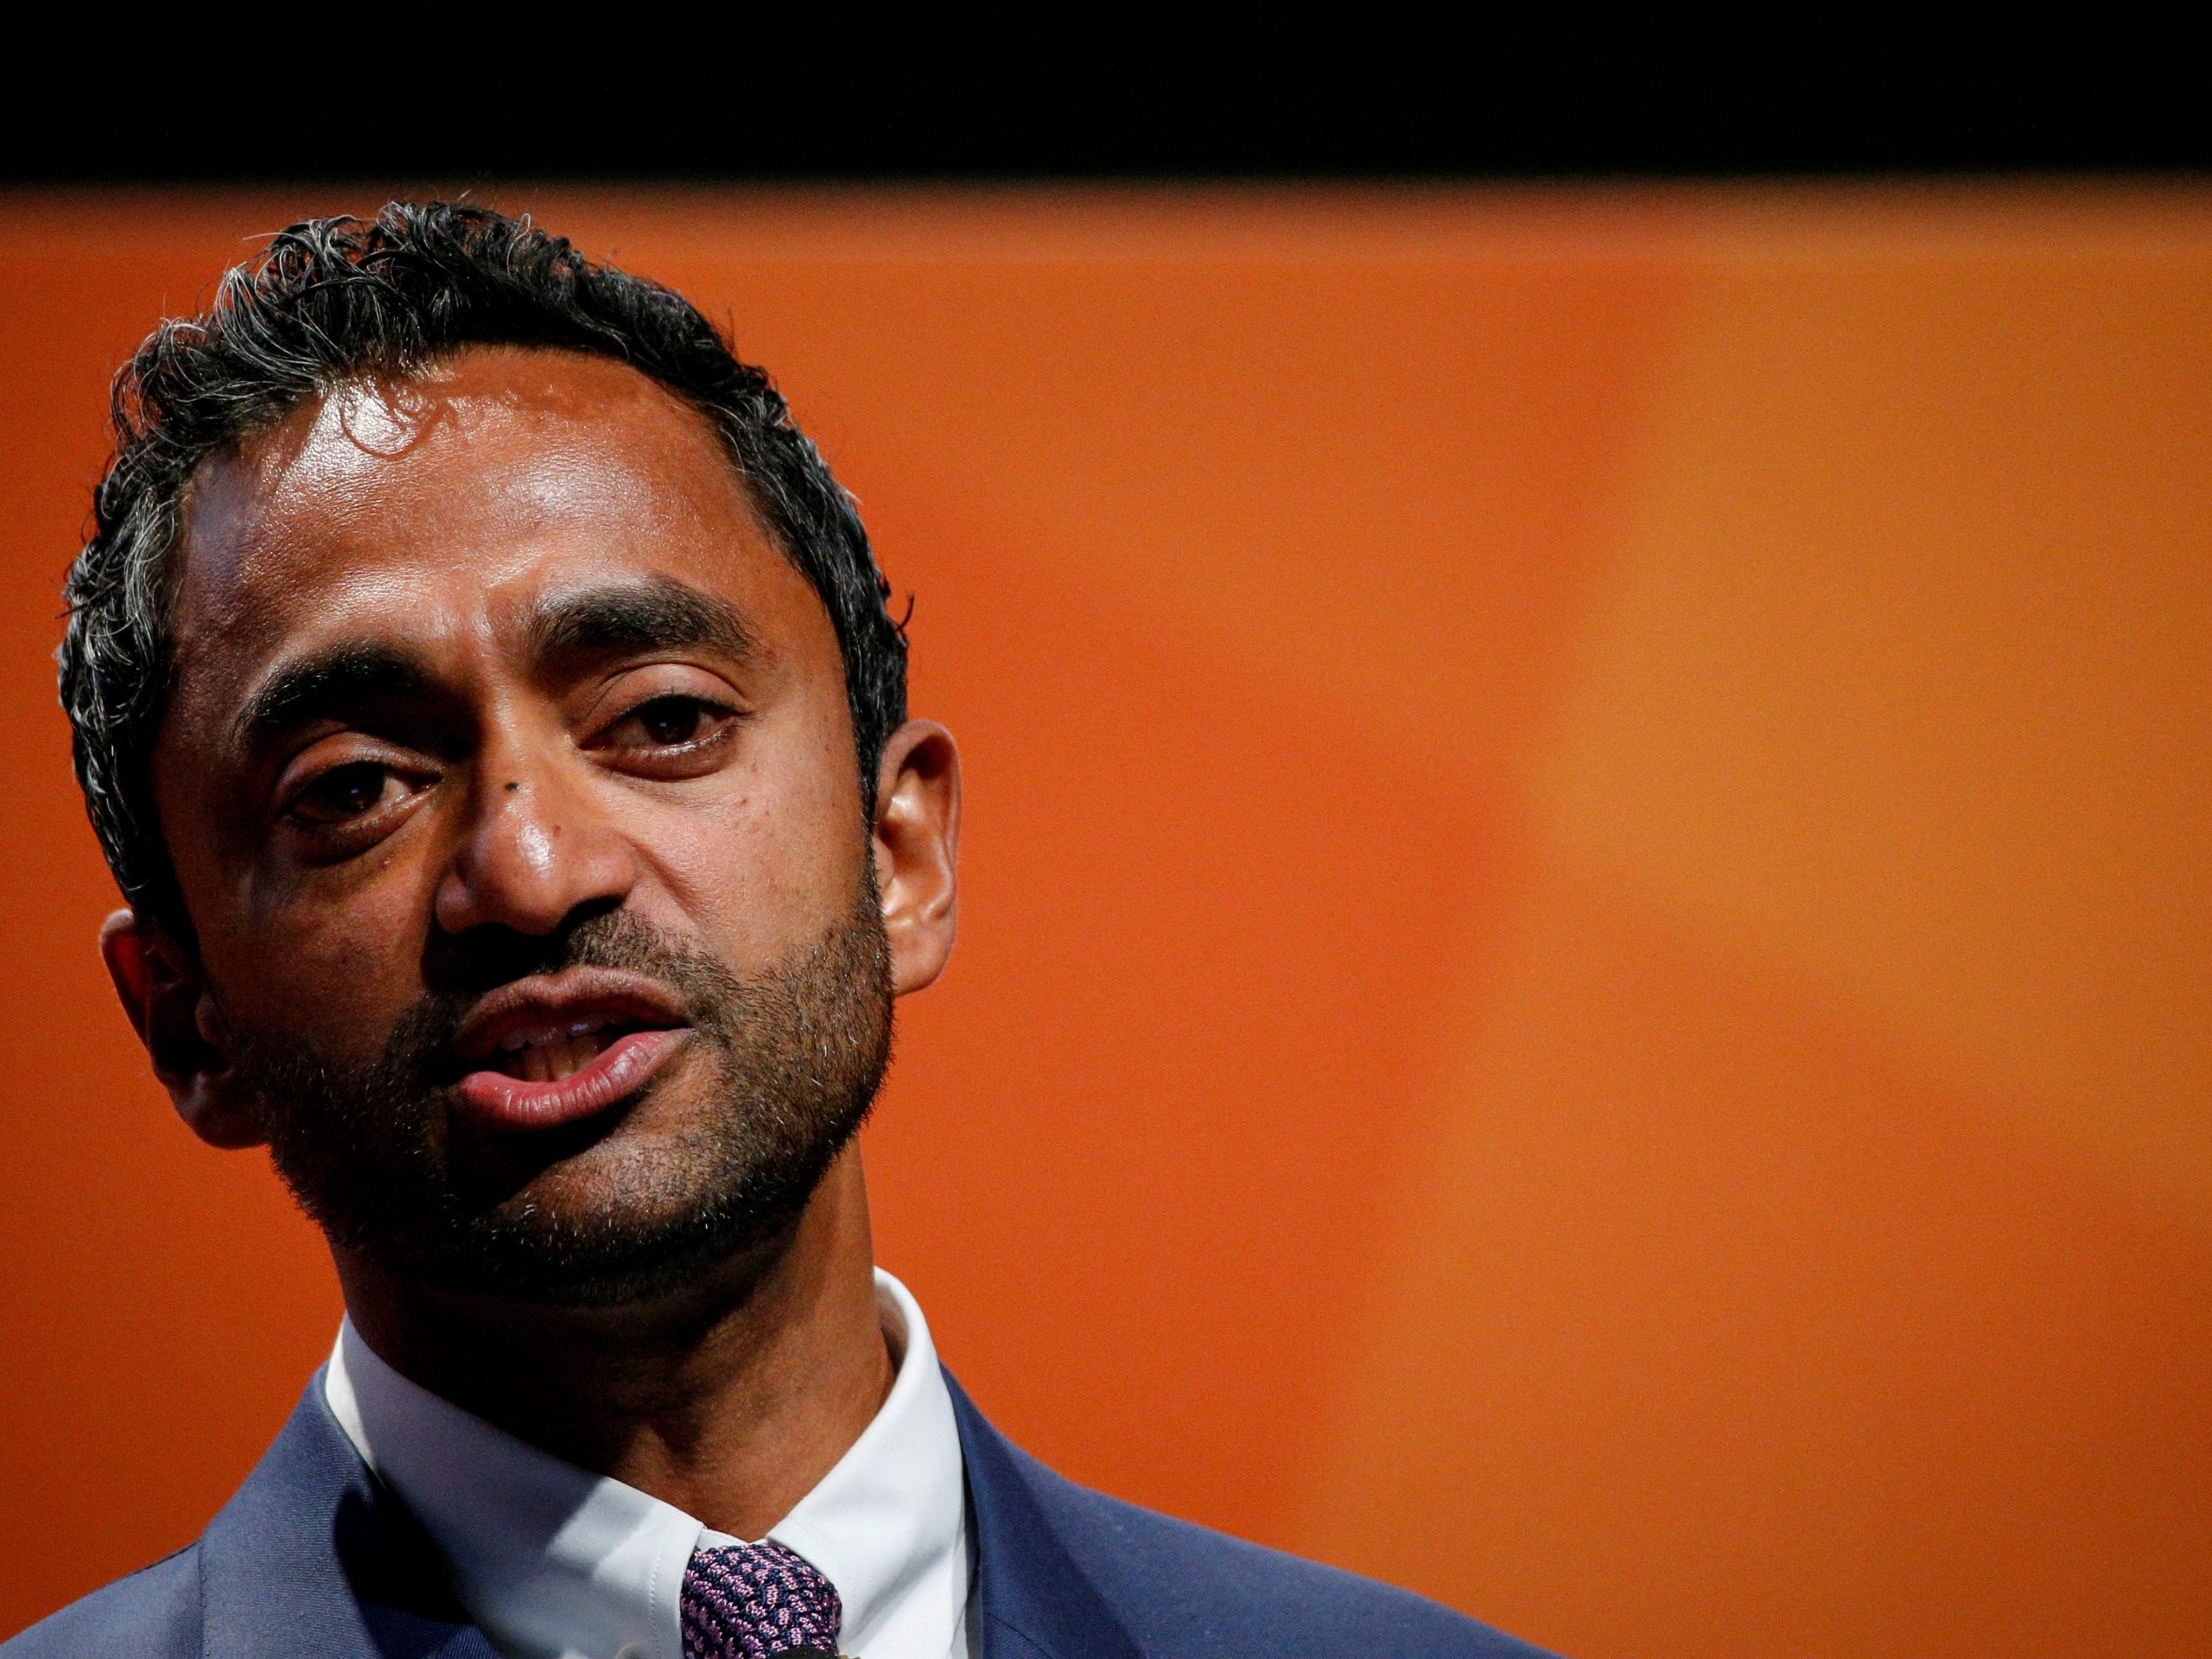 FILE PHOTO: Chamath Palihapitiya, Founder and CEO of Social Capital, presents during the 2018 Sohn Investment Conference in New York City, U.S., April 23, 2018. REUTERS/Brendan McDermid/File Photo